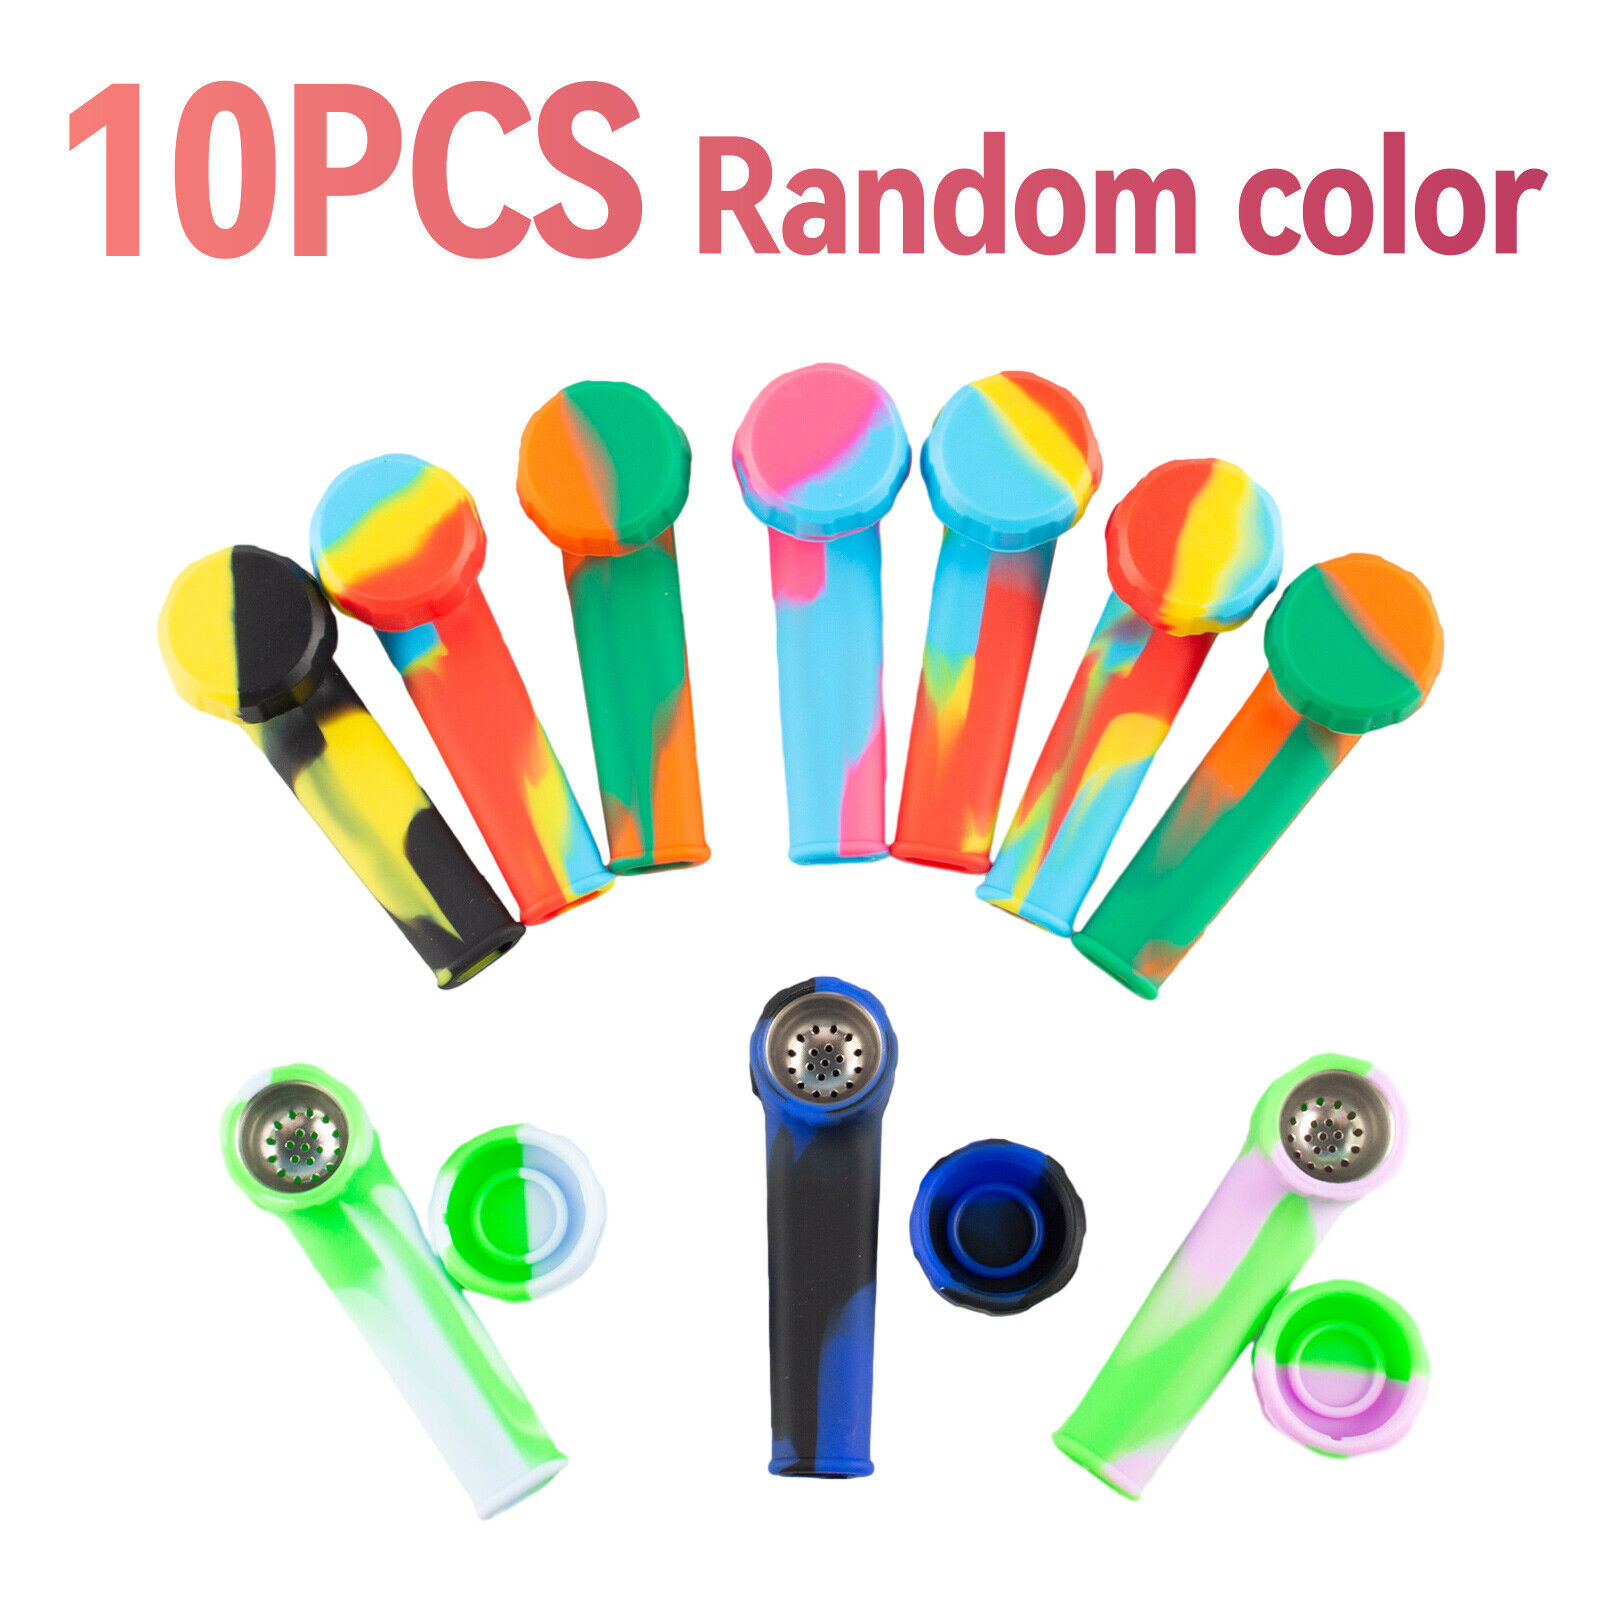 10pc 3.4'' Mini Silicone Smoking Hand Pipe with Metal Bowl &Cap Lid Pocket Pipe/